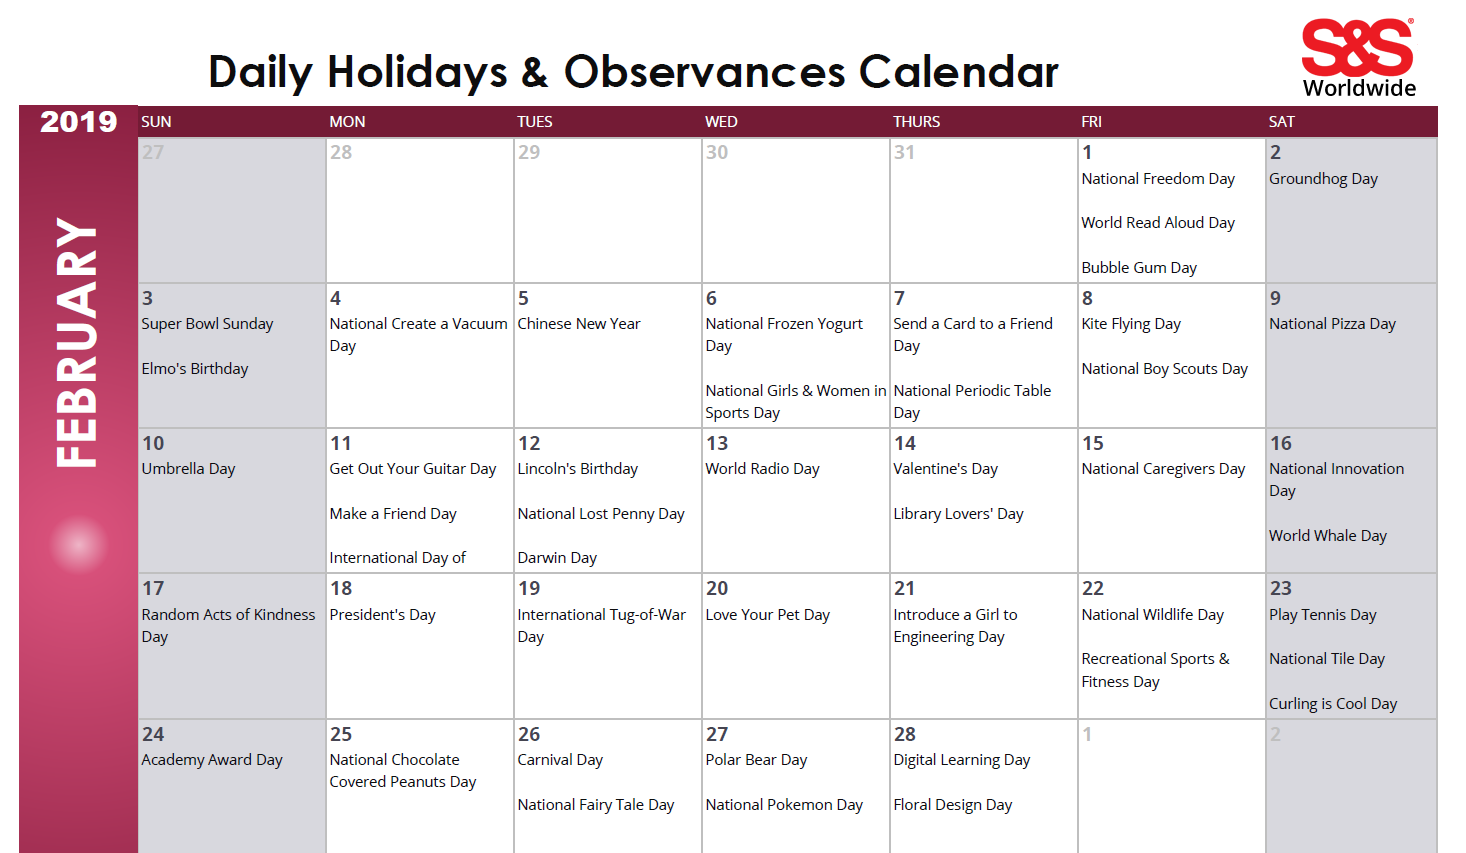 Observances By Month